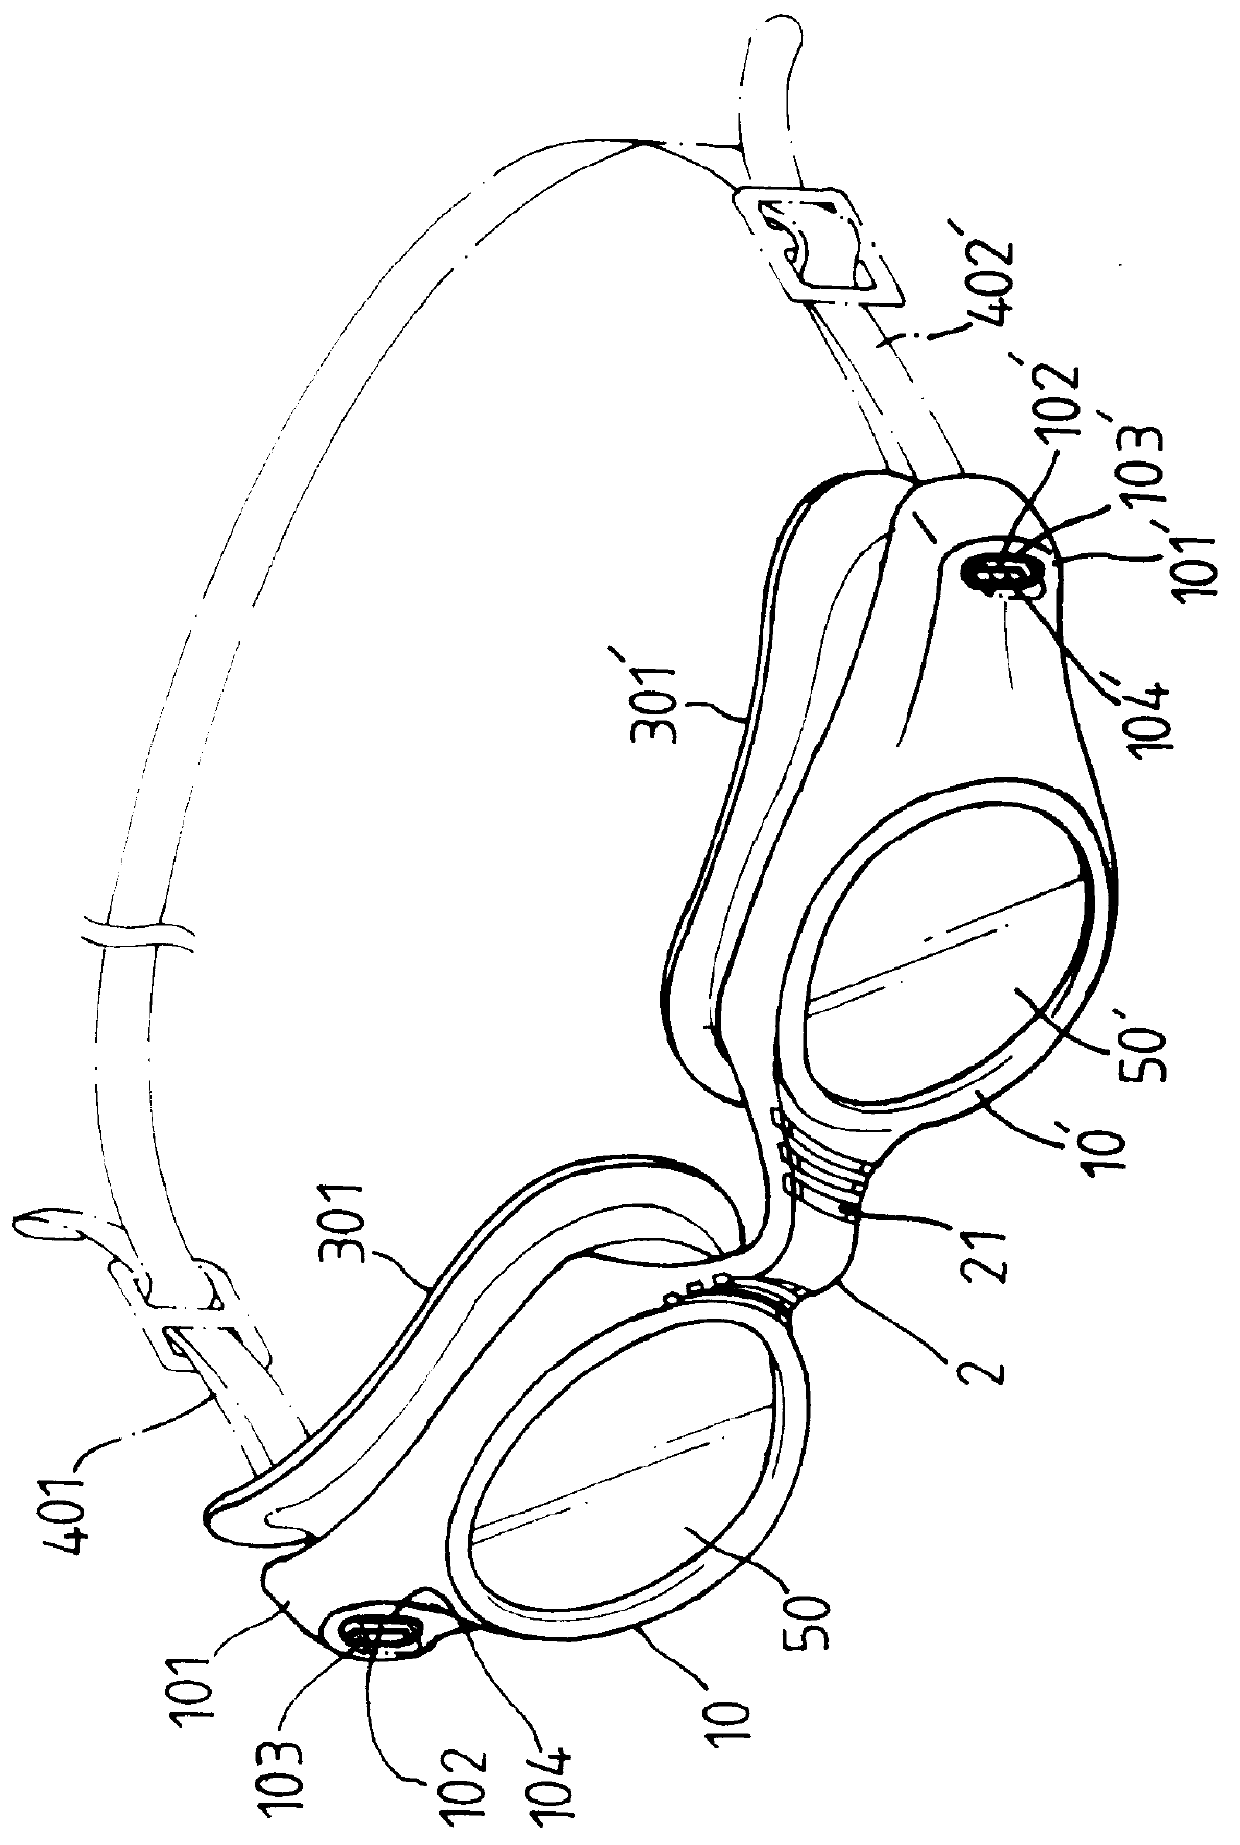 Goggles with connecting plate assembly at outer ends